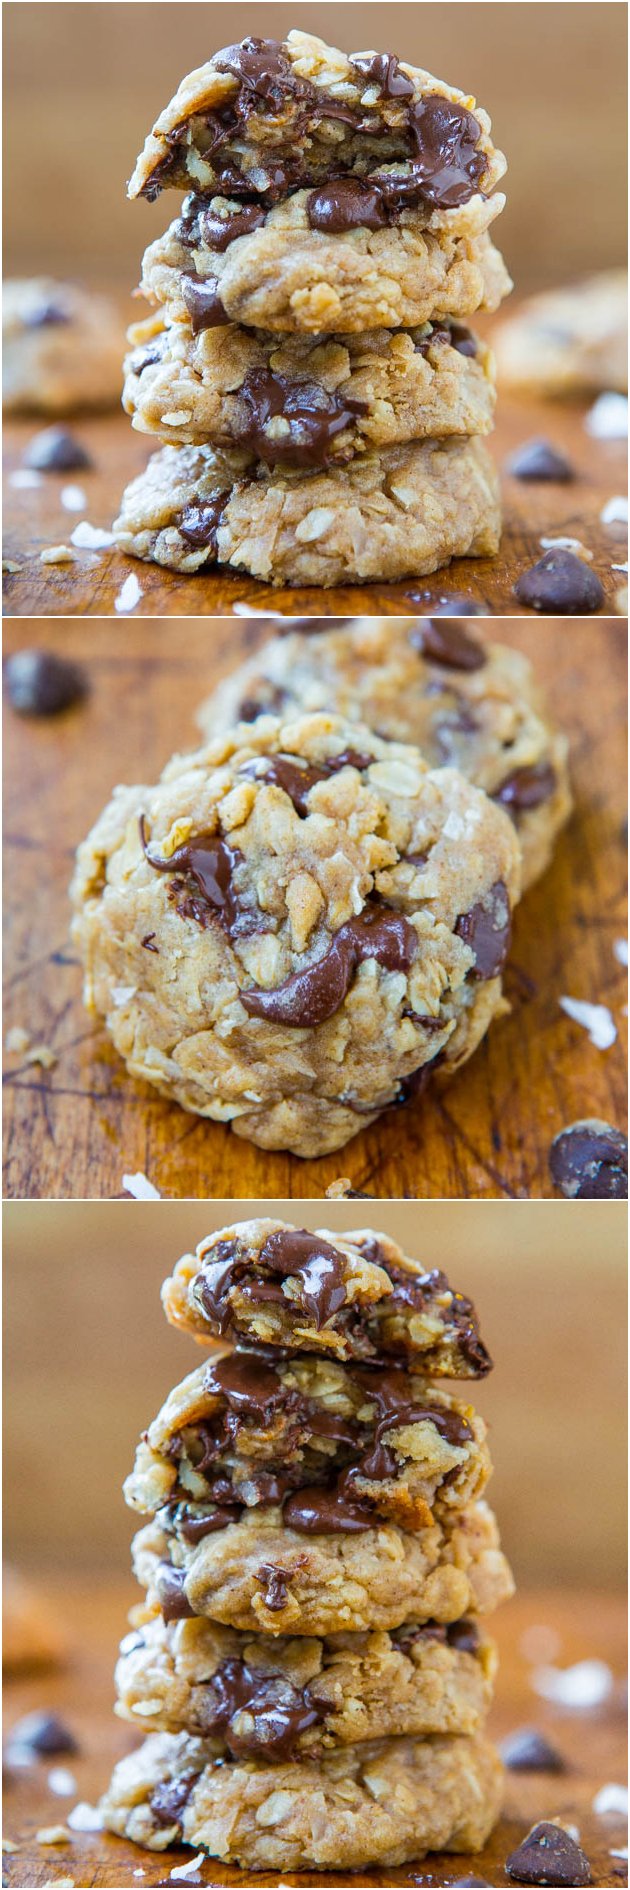 Soft and Chewy Oatmeal Coconut Chocolate Chip Cookies - No butter & no mixer used in these easy cookies dripping with chocolate. Recipe at averiecooks.com